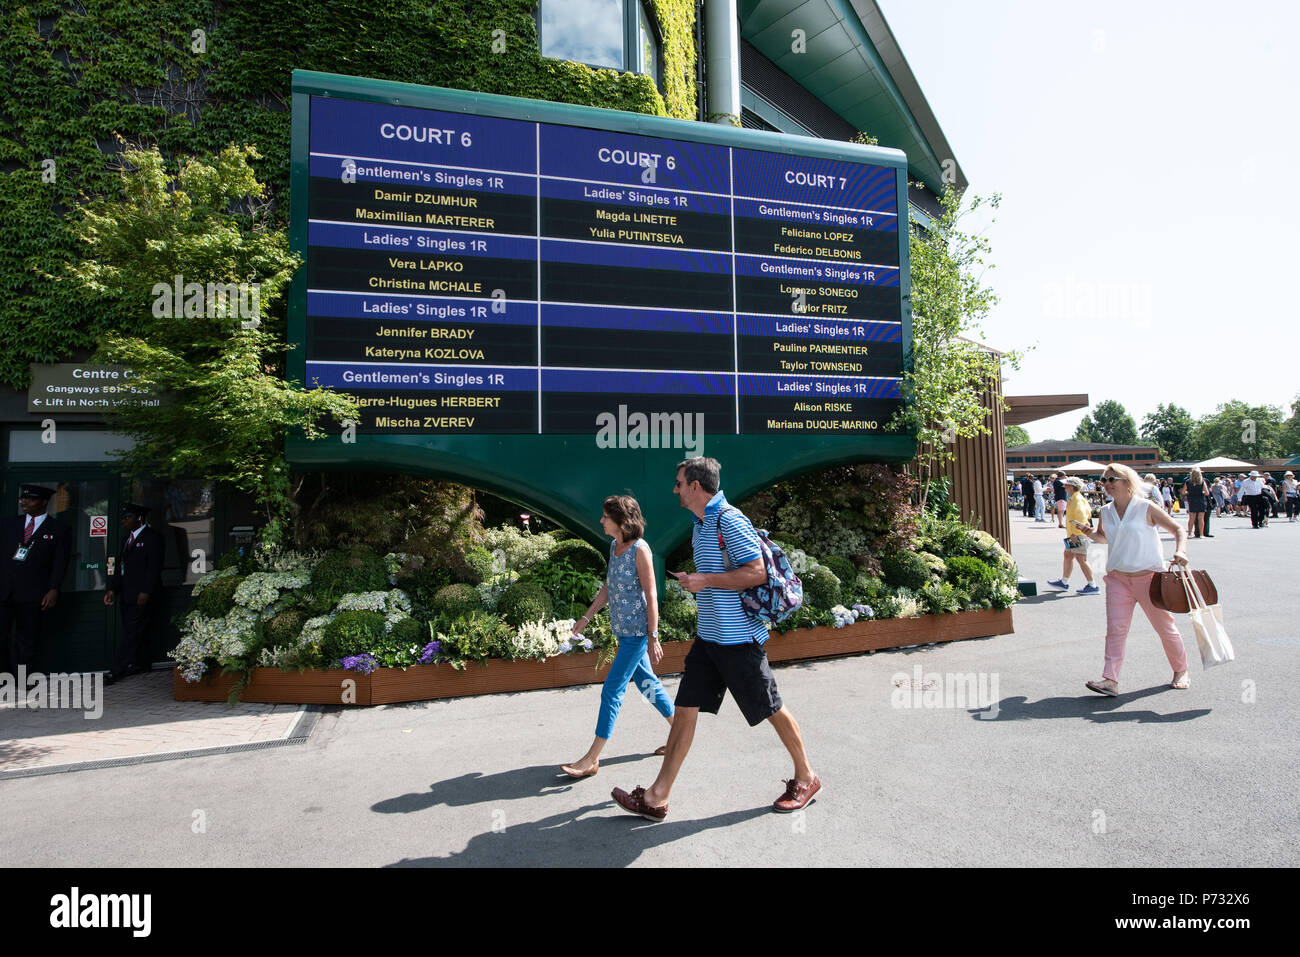 London, UK. 3rd July, 2018. An electronic score board on the grounds of the The All England Lawn Tennis and Croquet Club during the Wimbledon Tennis Championships 2018, Day 2. London, United Kingdom, 03 July 2018 Credit: Raymond Tang/Alamy Live News Stock Photo